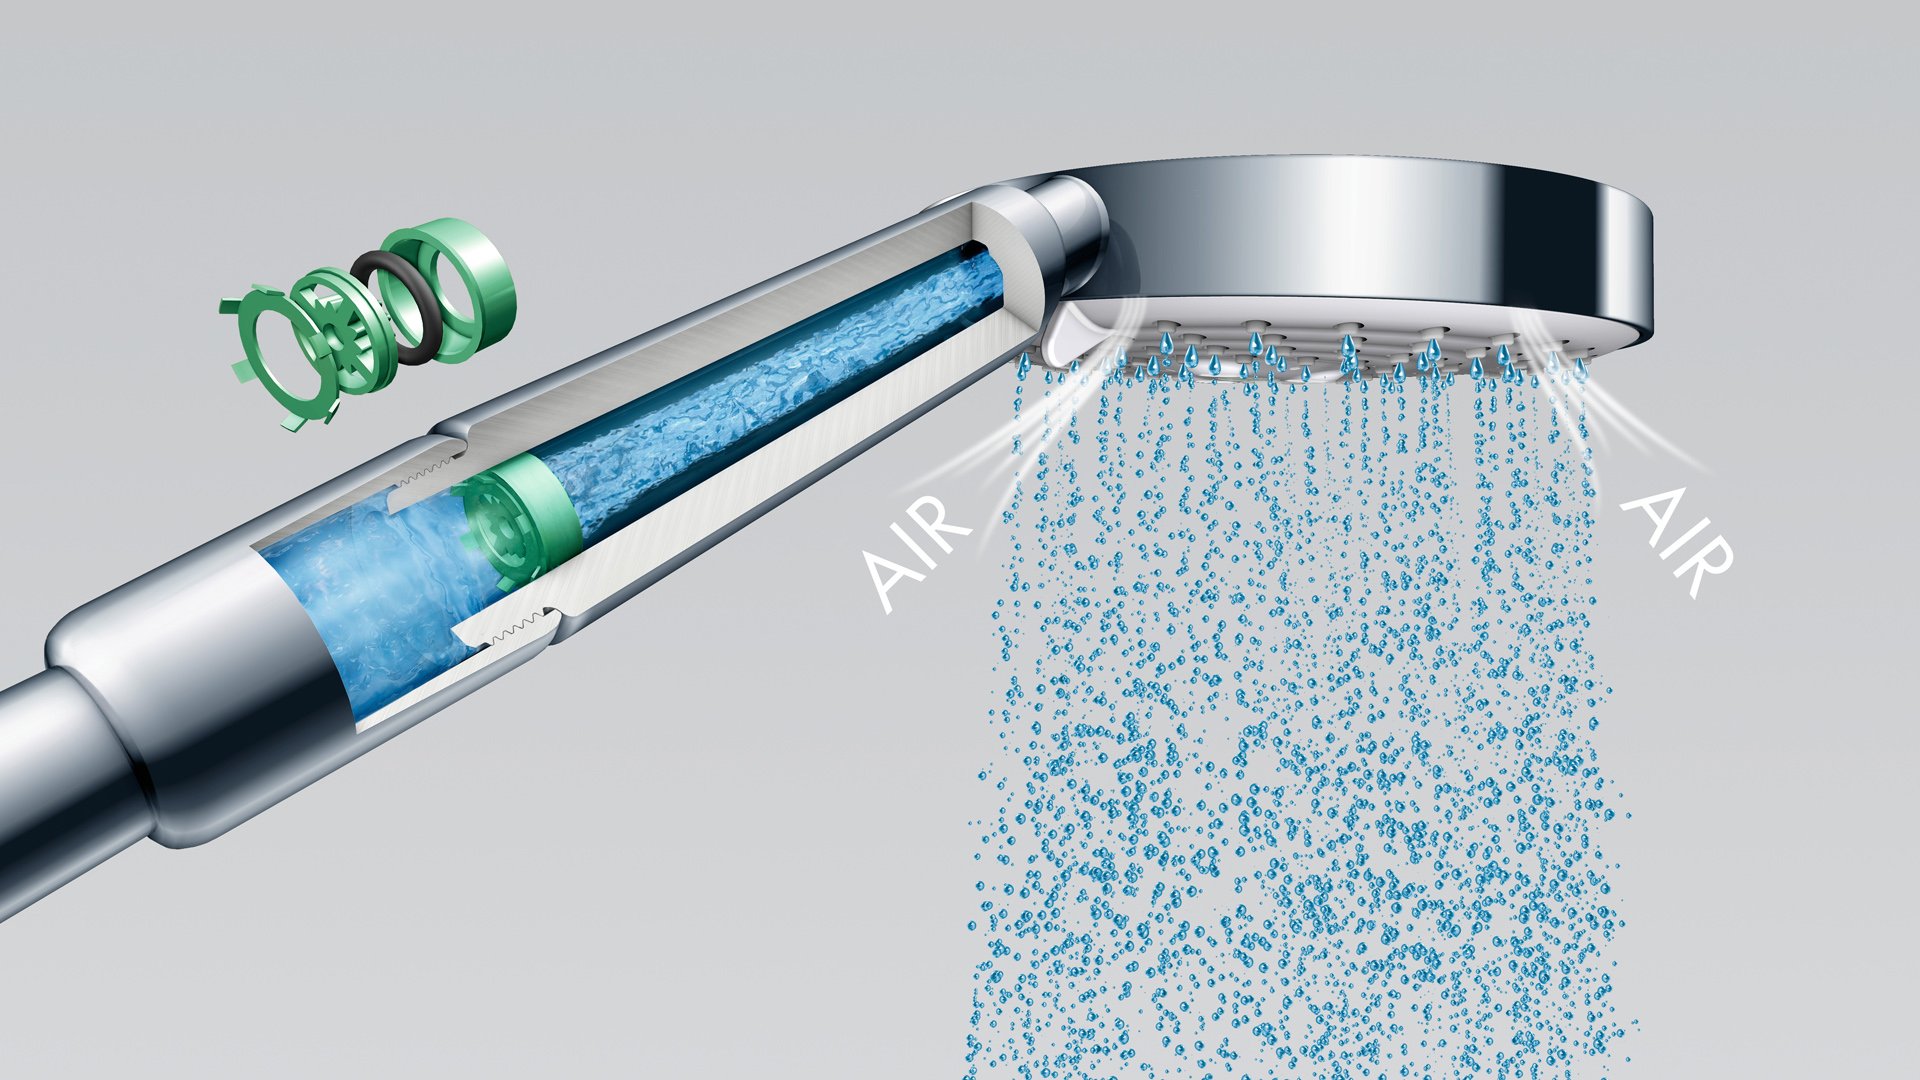 World Water Day 2022 hansgrohe’s EcoSmart Technology Guarantees Up To 60% Less Water Usage